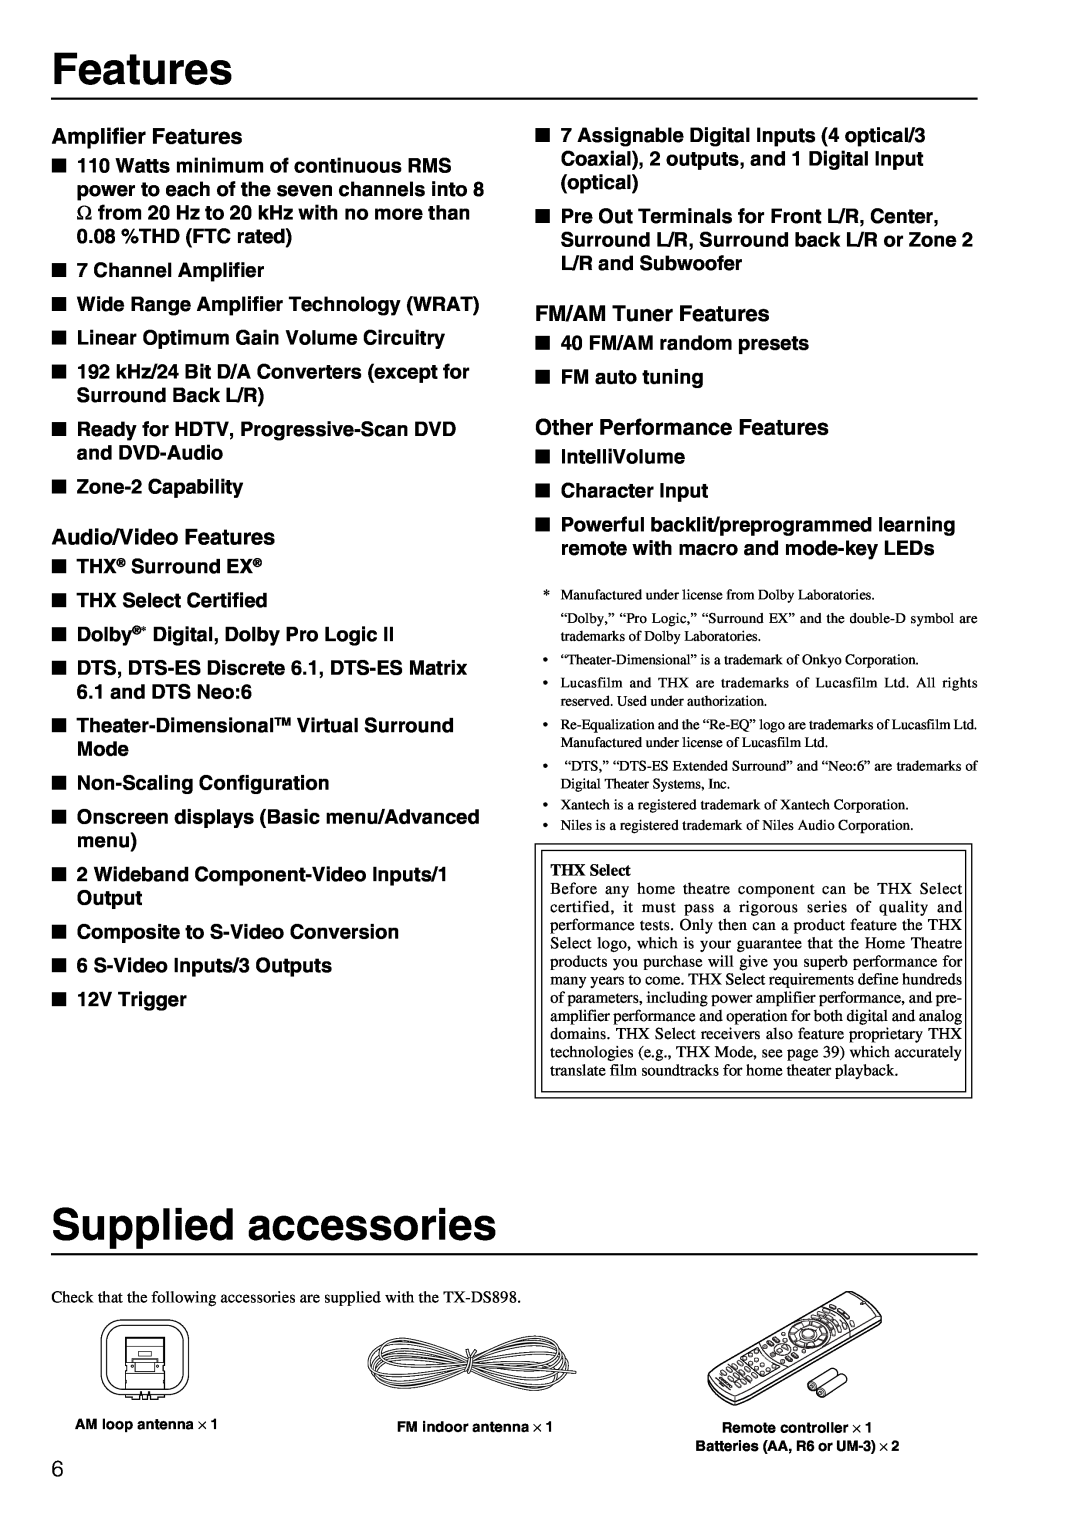 Onkyo TX-DS898 instruction manual Supplied accessories, Amplifier Features, Audio/Video Features, FM/AM Tuner Features 